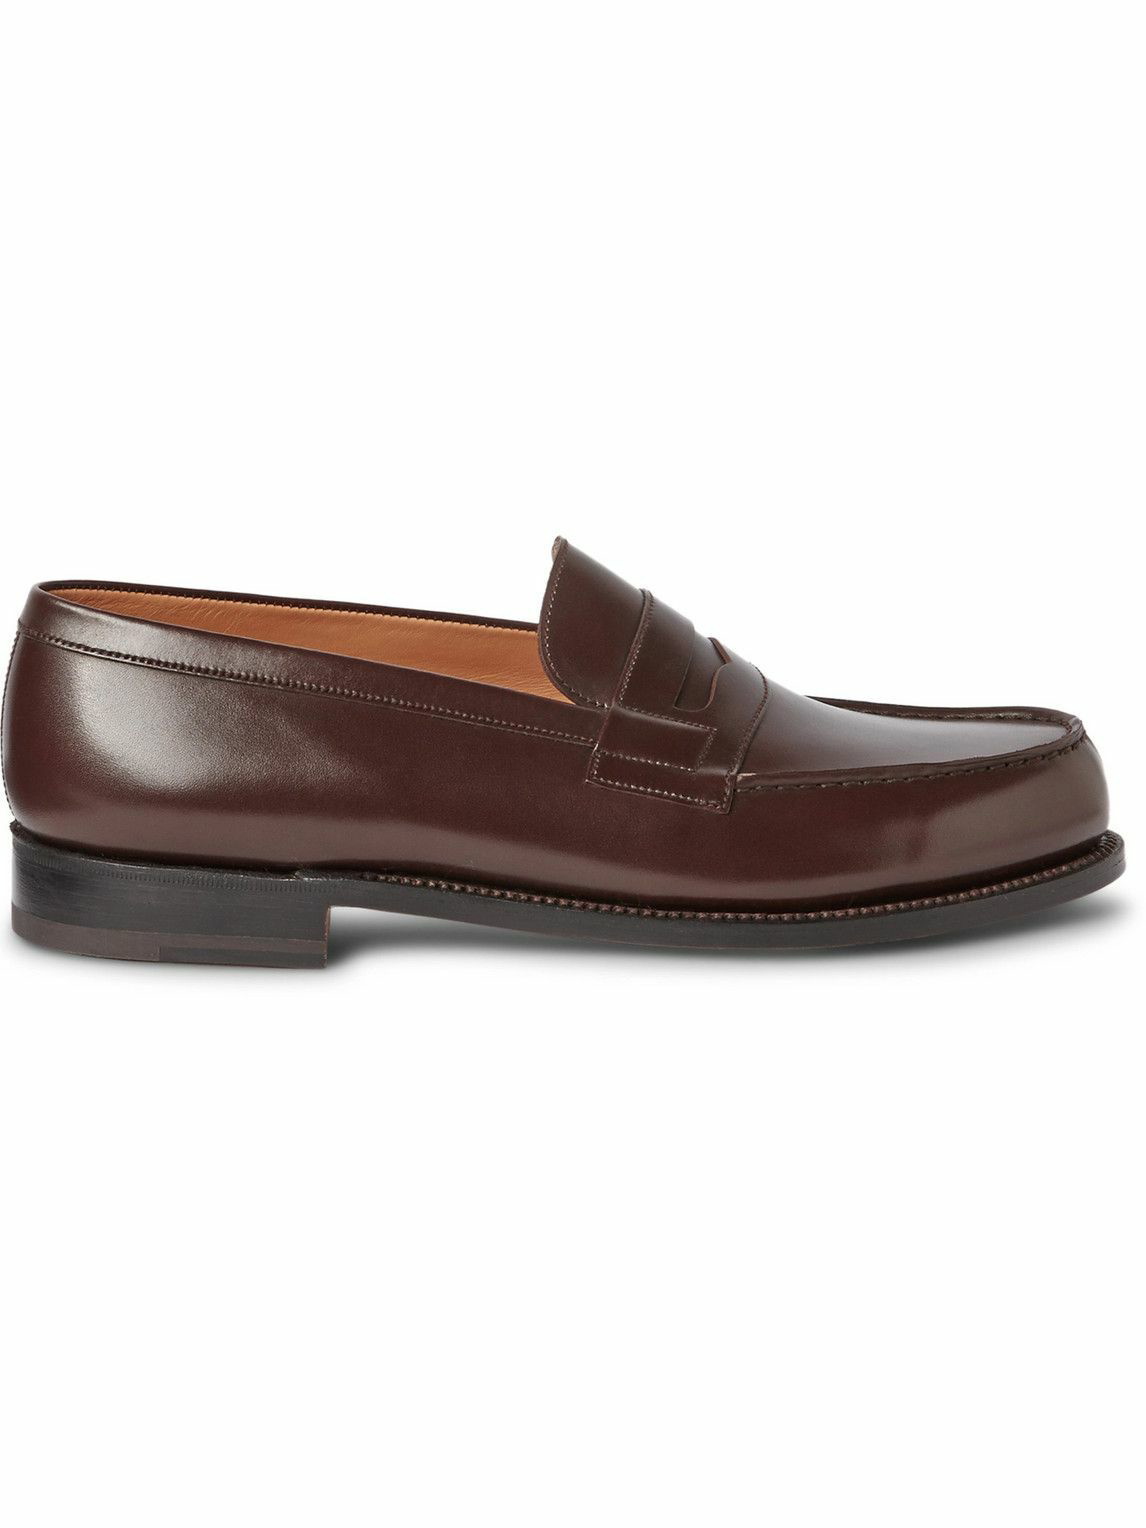 J.M. Weston - 180 Moccasin Leather Loafers - Brown J.M. Weston